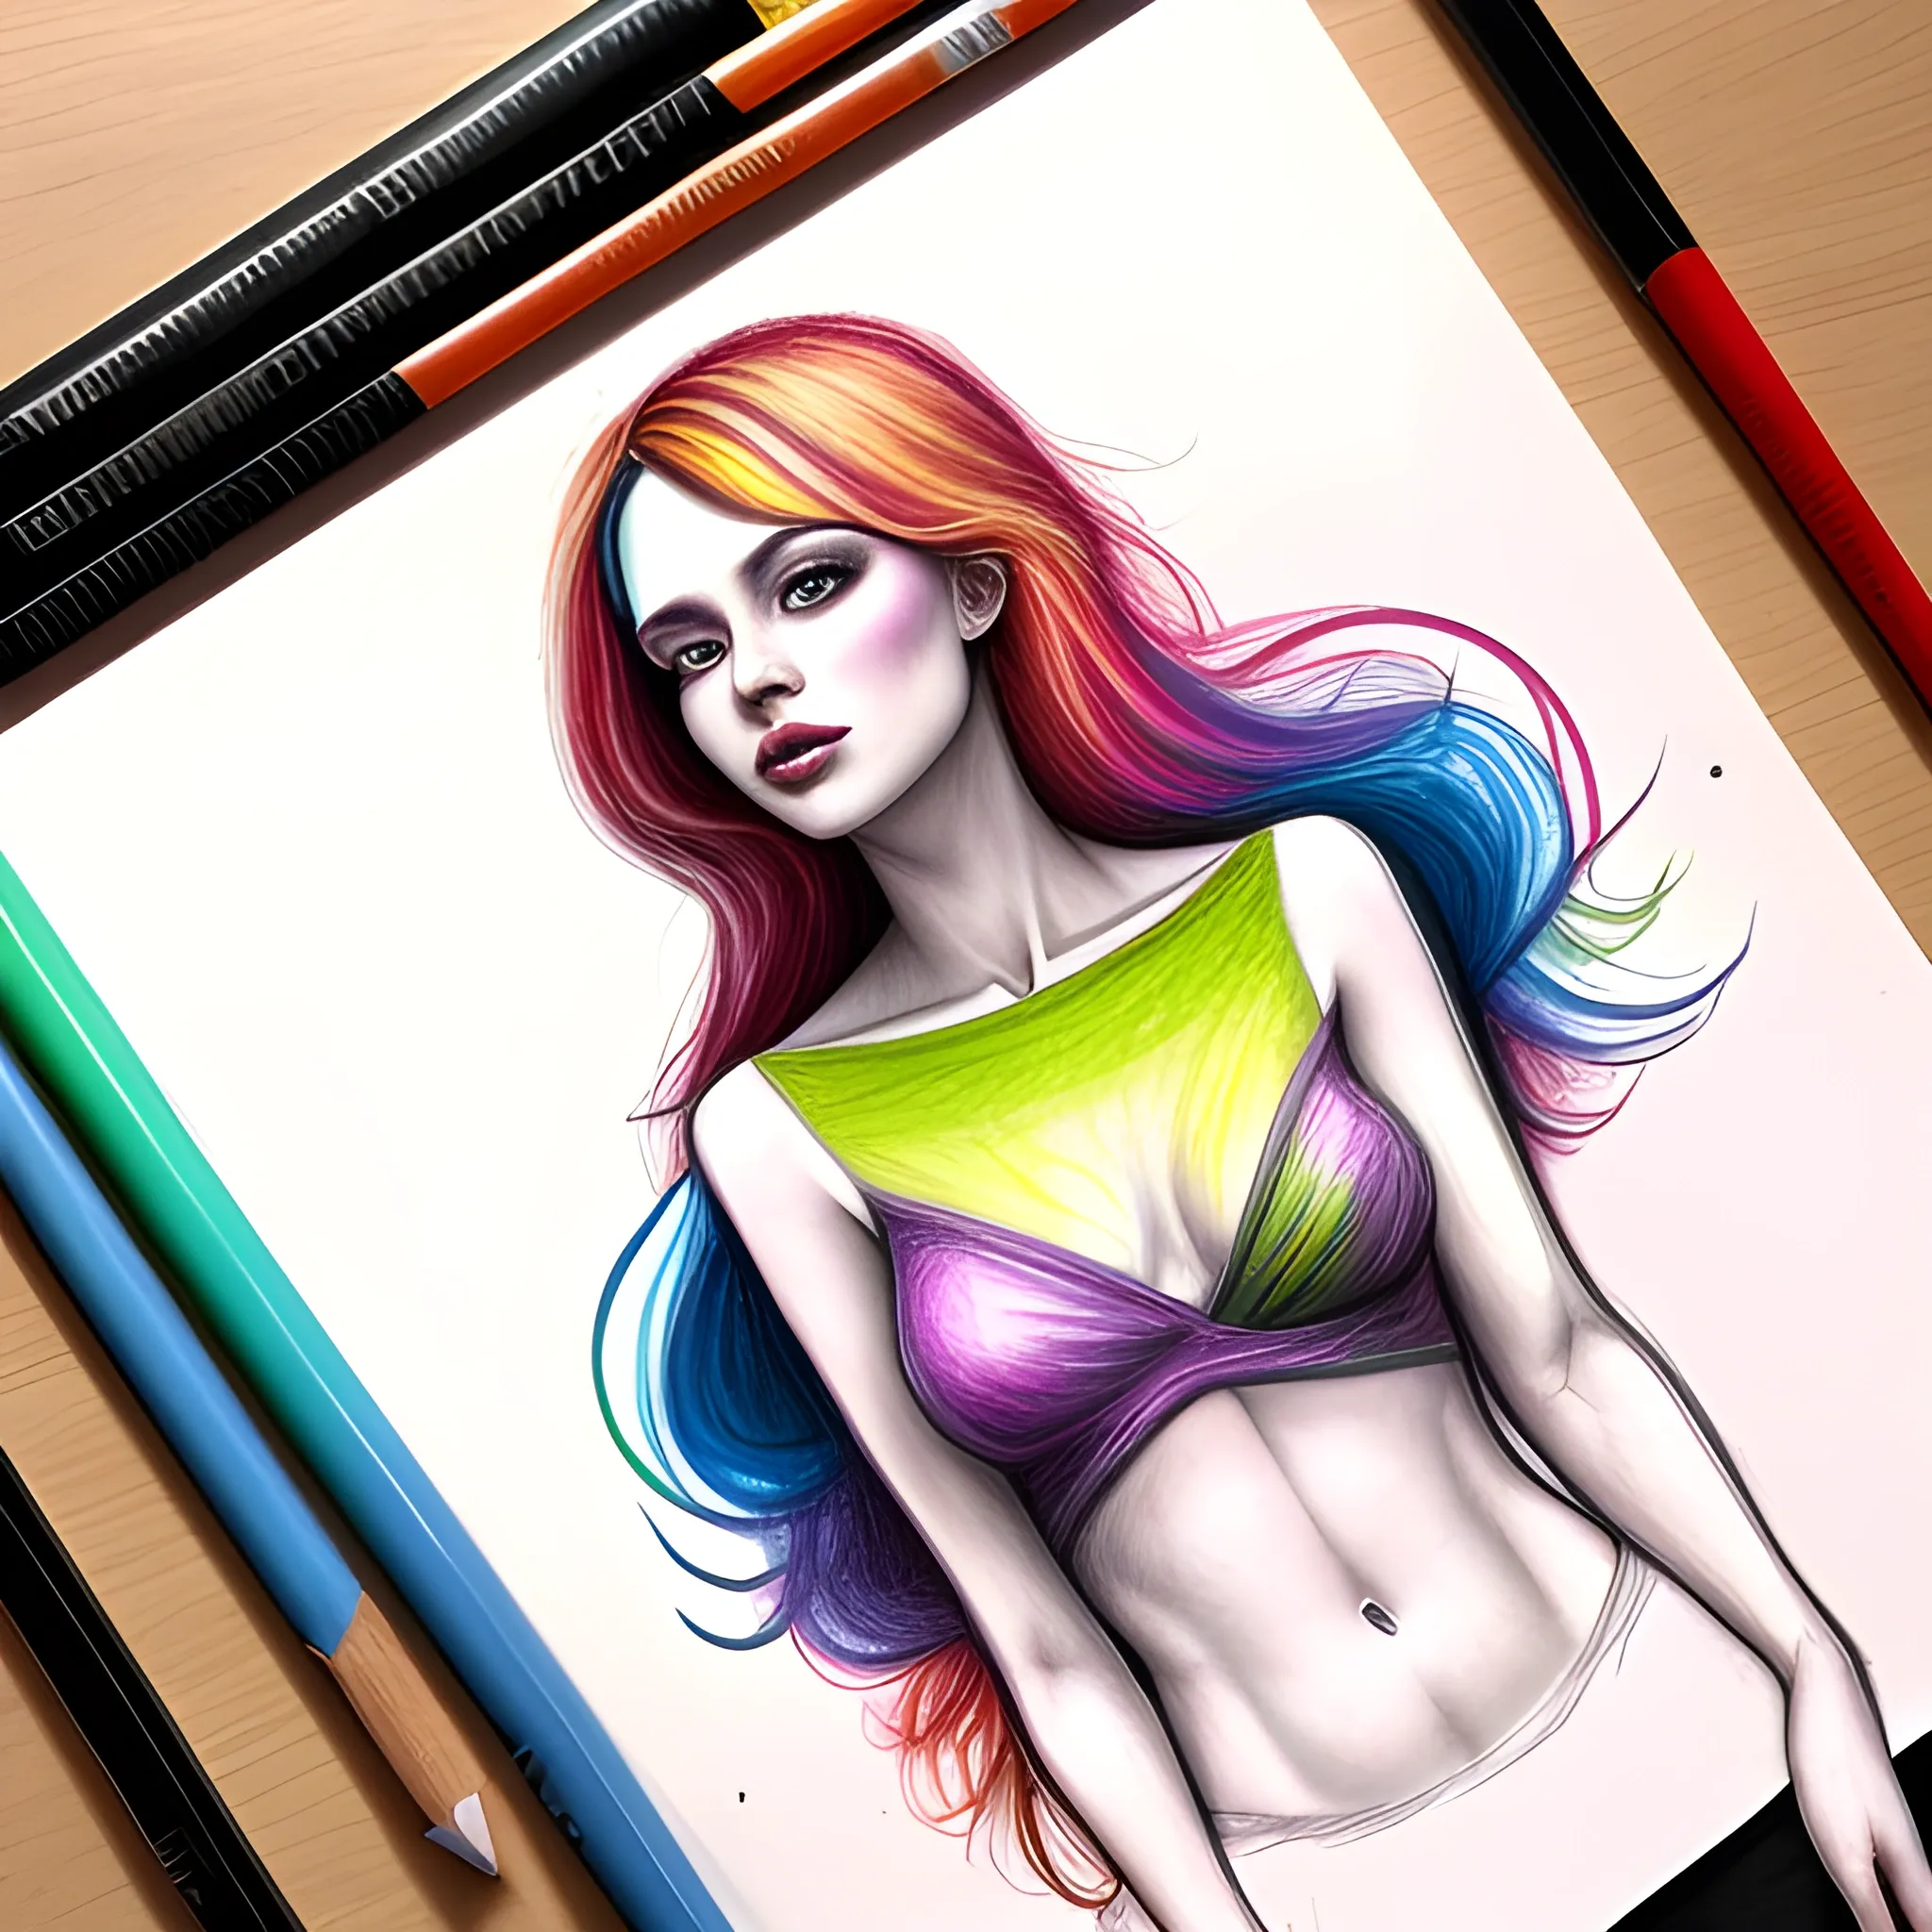 the woman is wearing multicolored hair, vibrant color scheme, Pencil Sketch, fully body